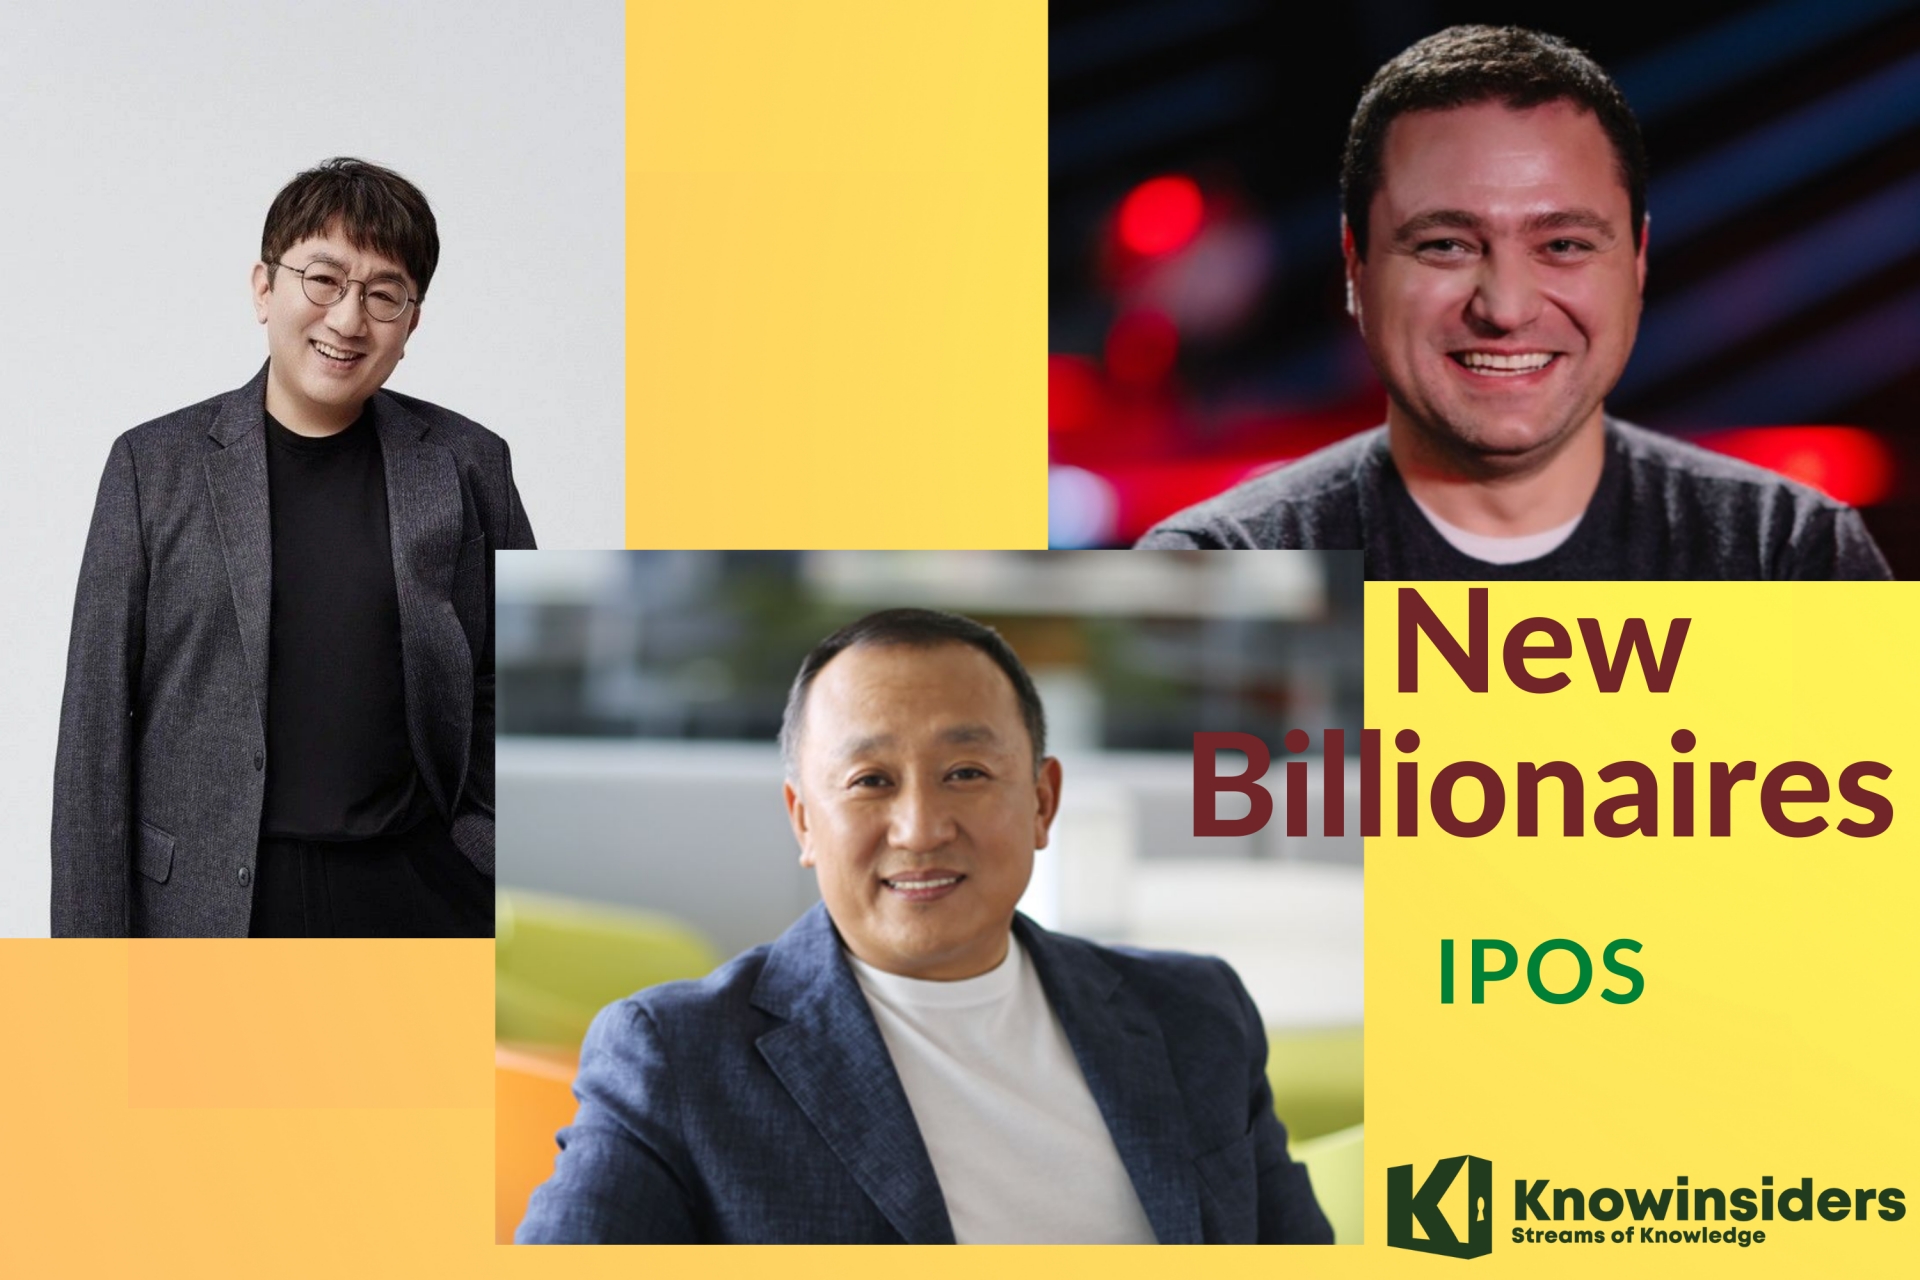 Top 11 New Billionaires from IPOs in the World Right Now